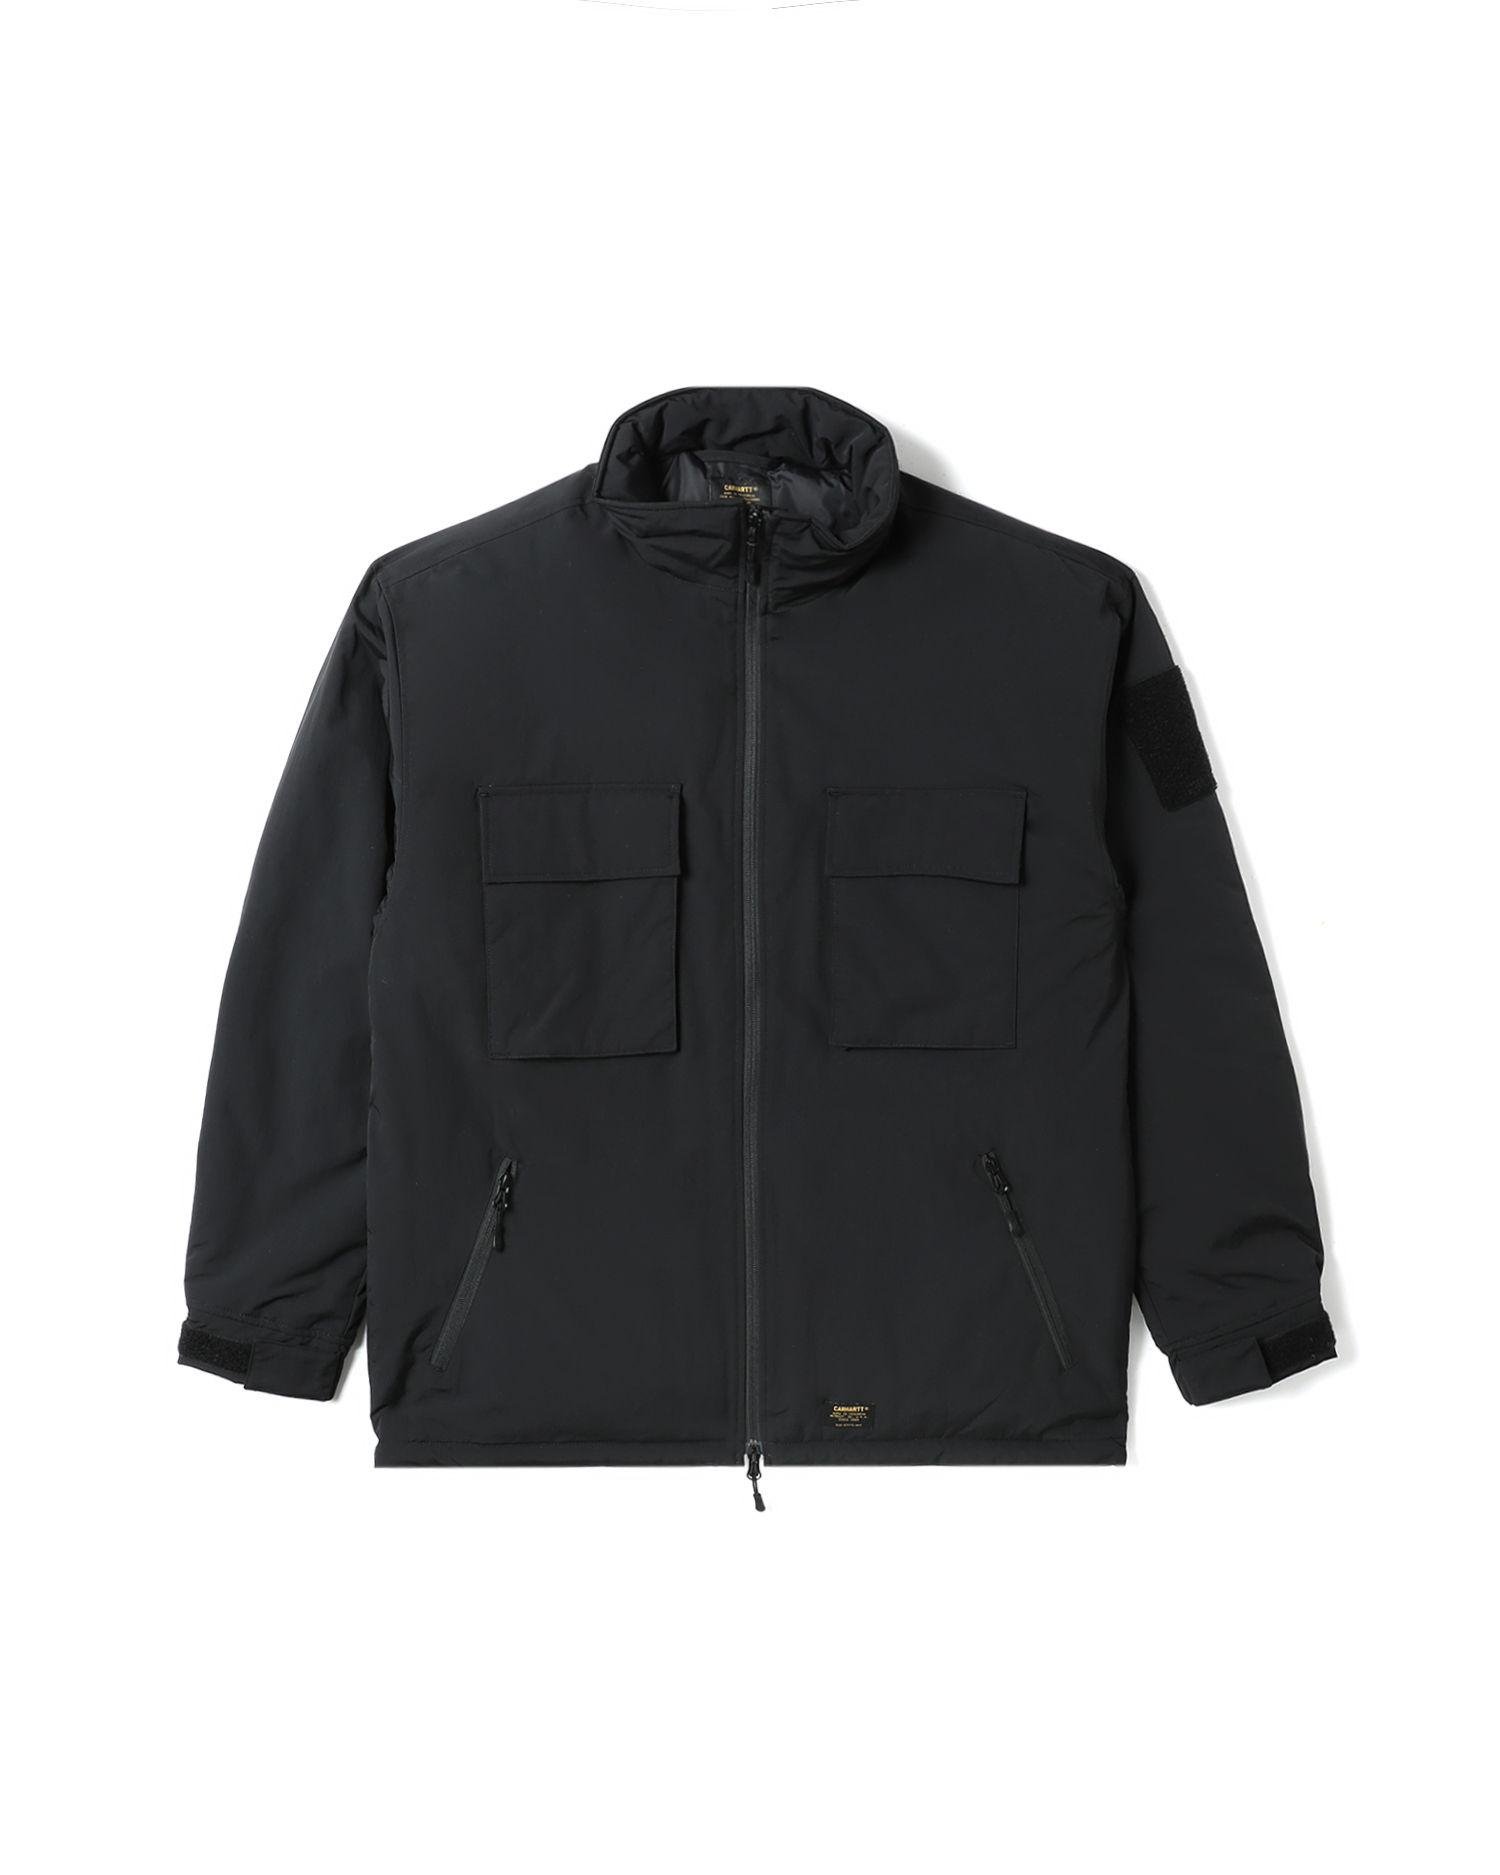 Gunther jacket by CARHARTT WIP | jellibeans